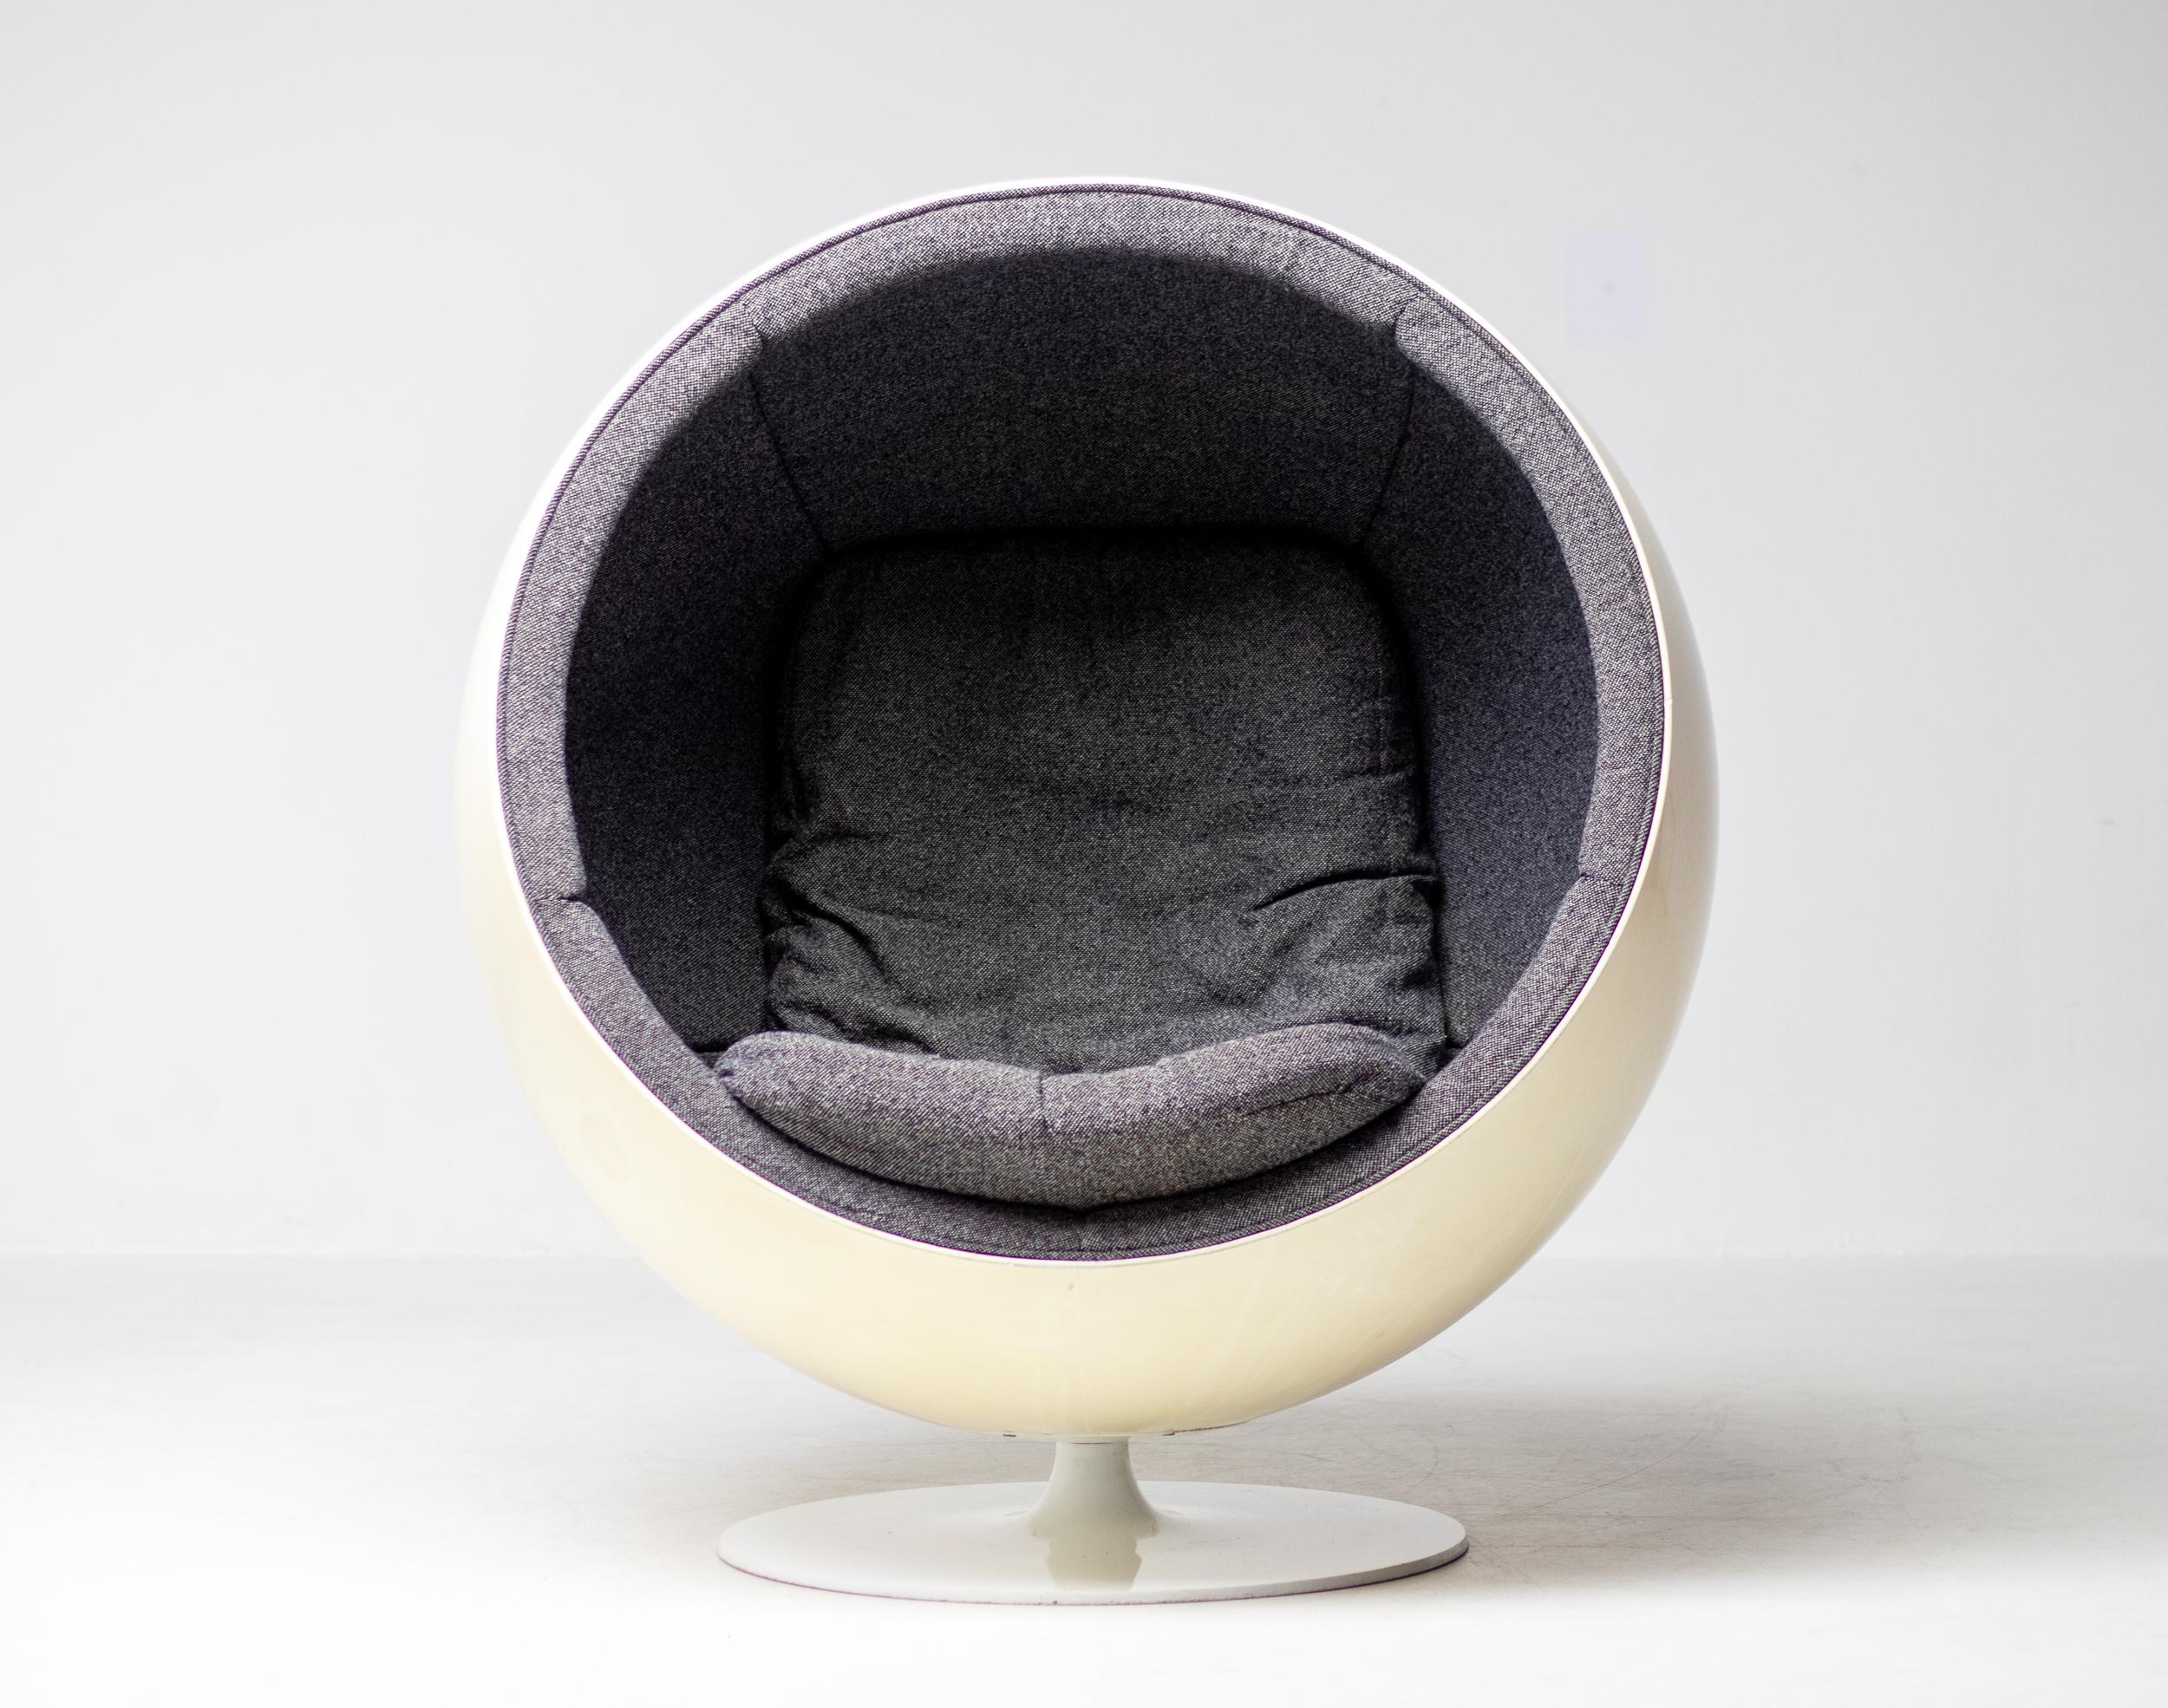 Original ball chair designed by Eero Aarnio and manufactured by Adelta, Finland.
The Ball chair was designed in 1963 and debuted at the Cologne Furniture Fair in 1966. The chair is one of the most famous and beloved classics of Finnish design and